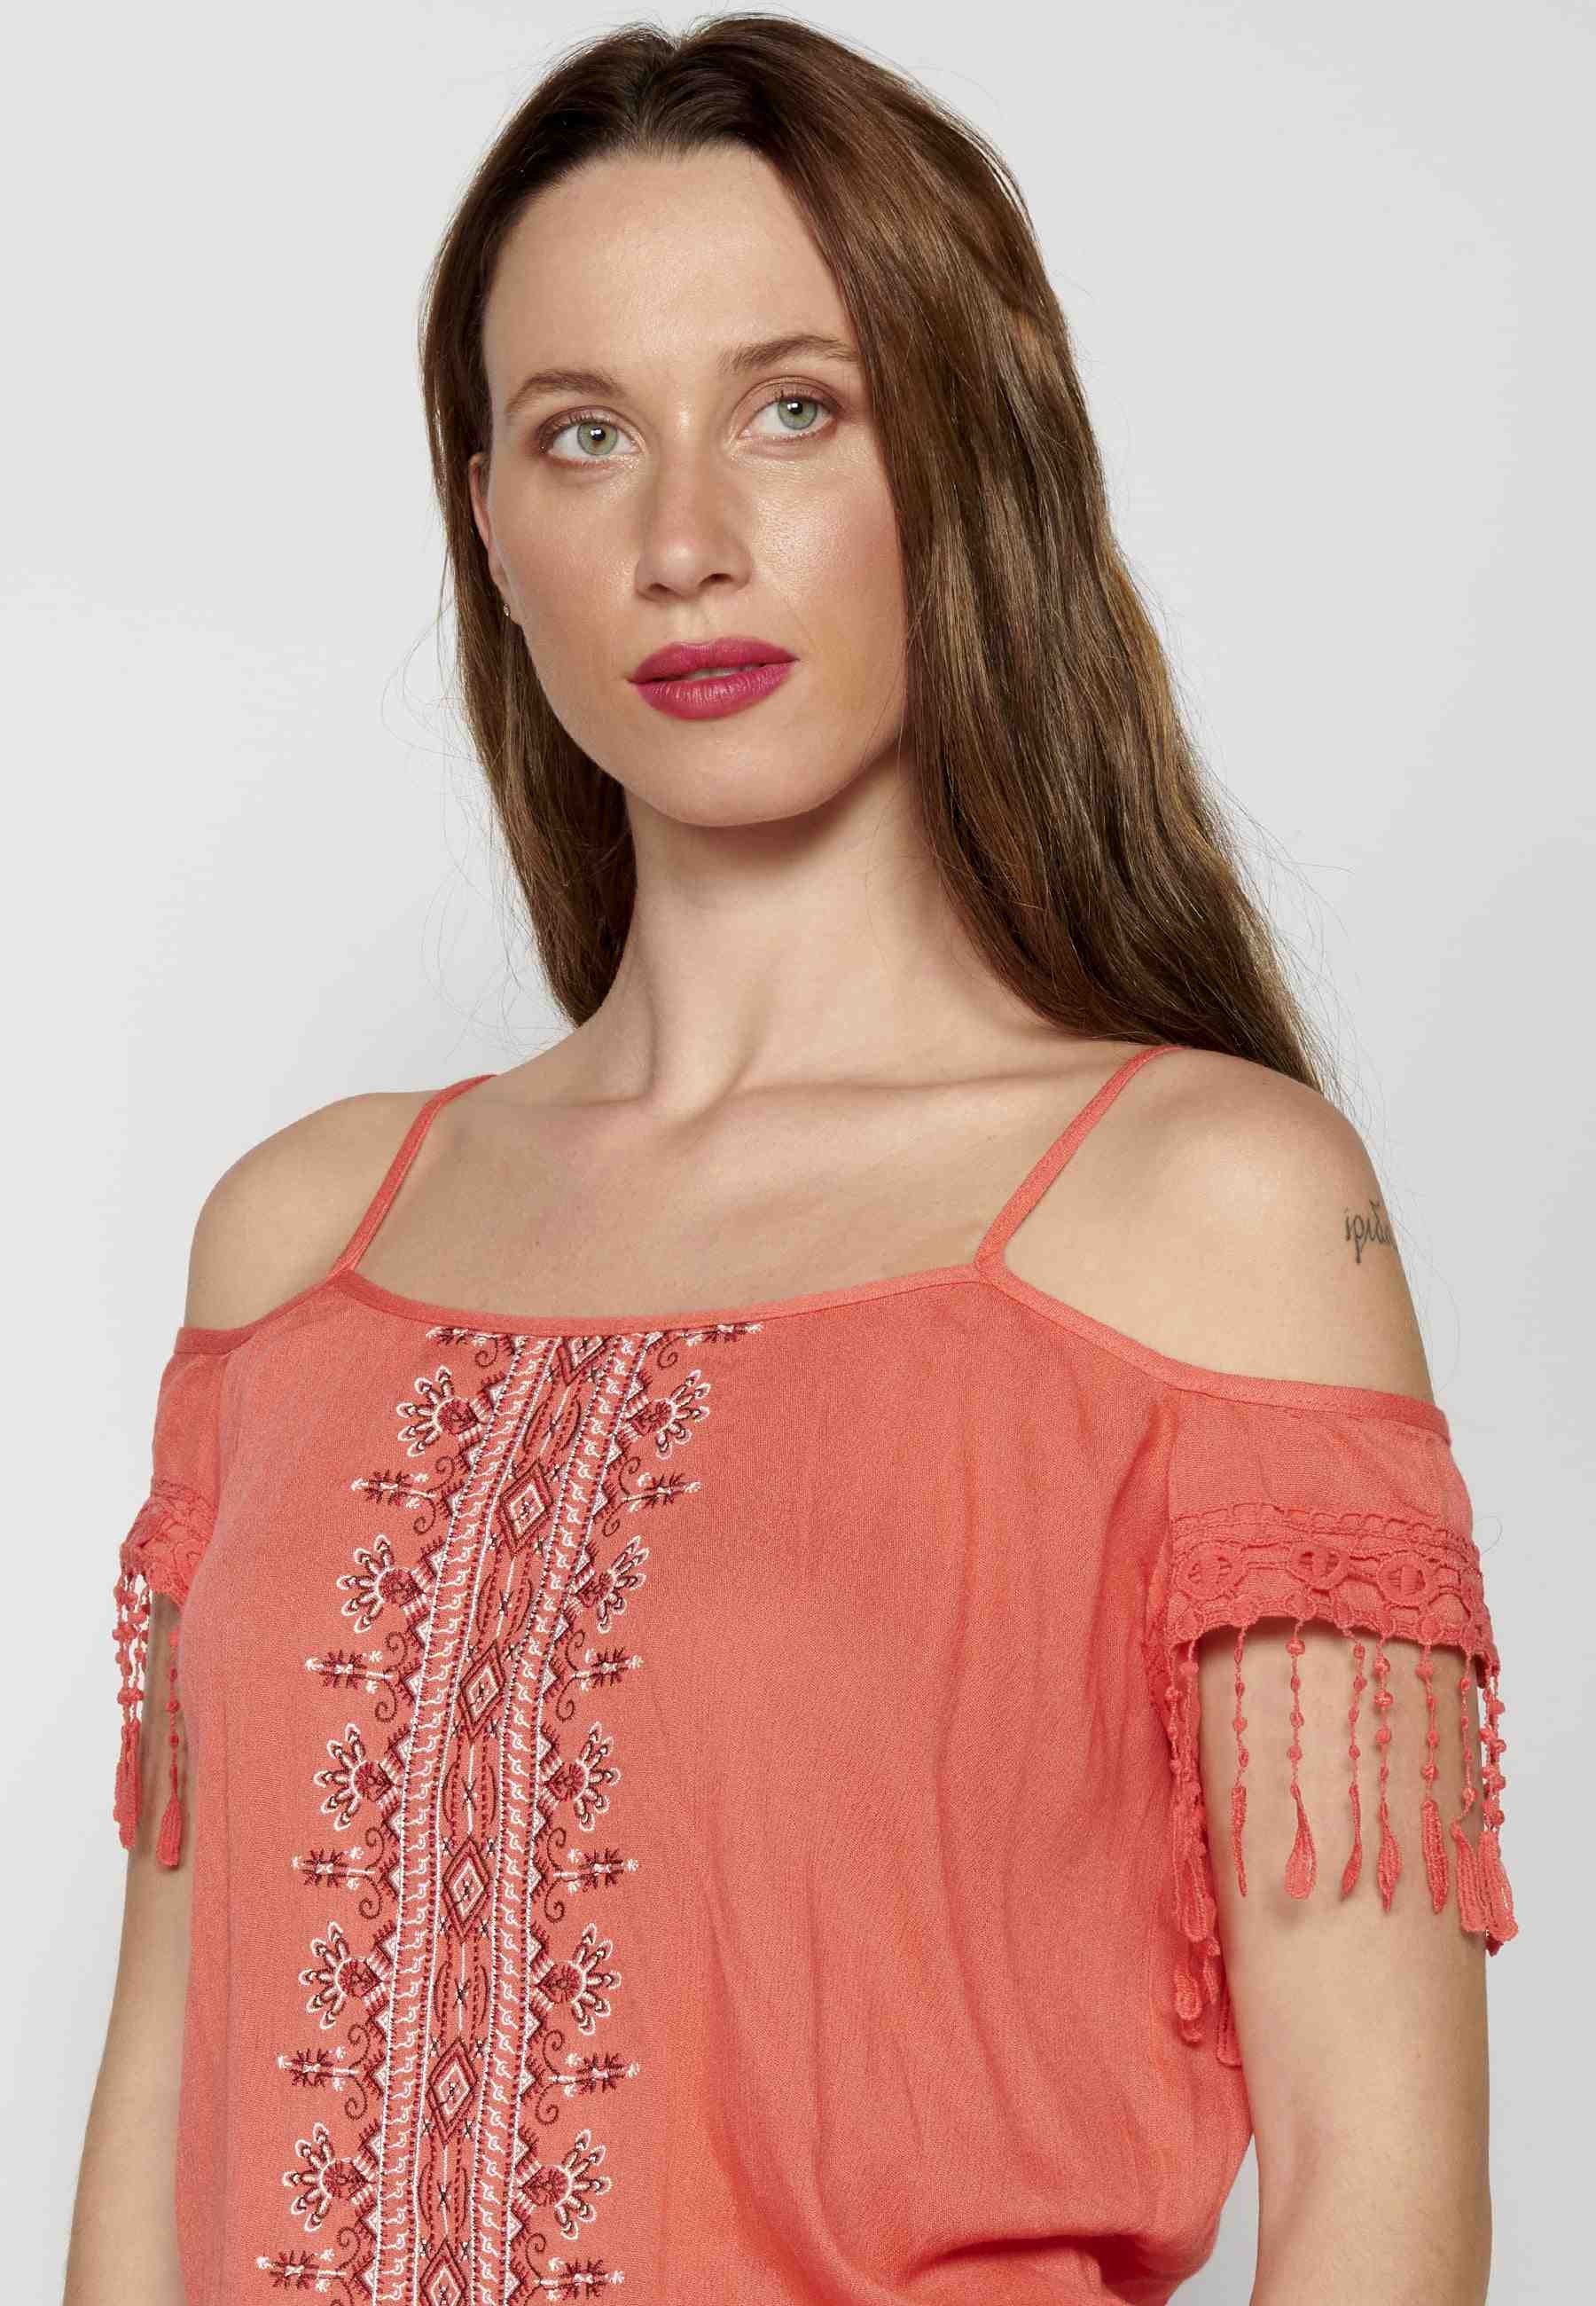 Blouse with straps ethnic style Coral color for Women